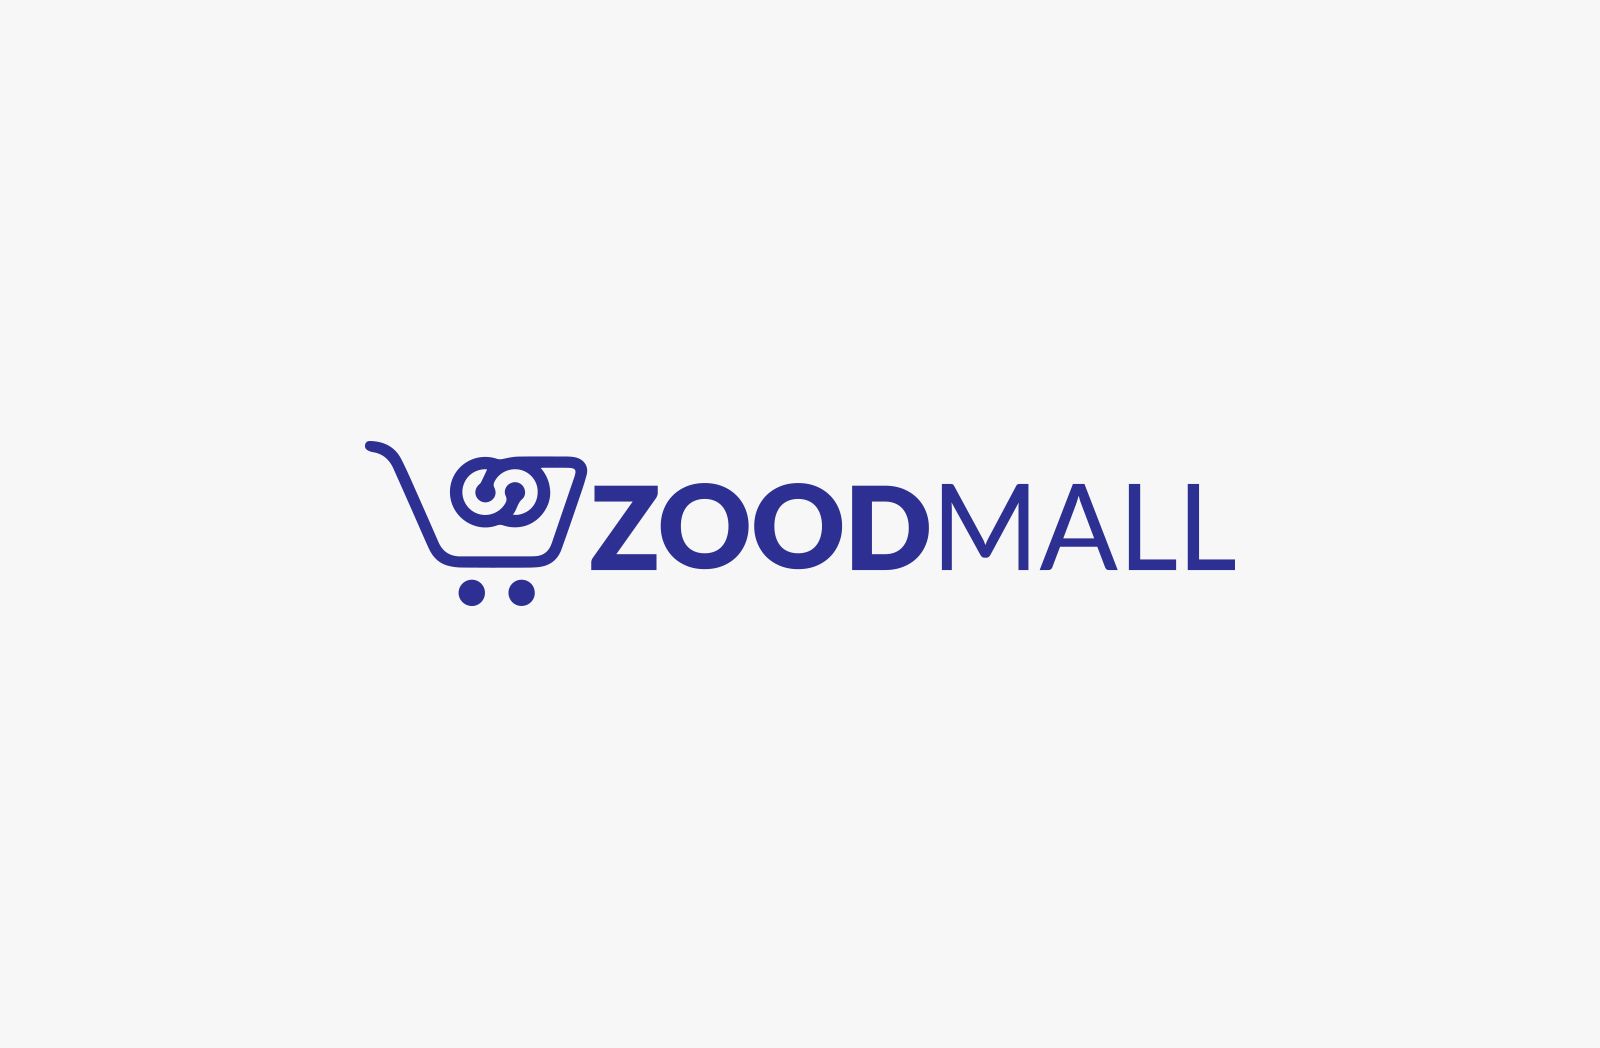 series zoodmall countries middle east